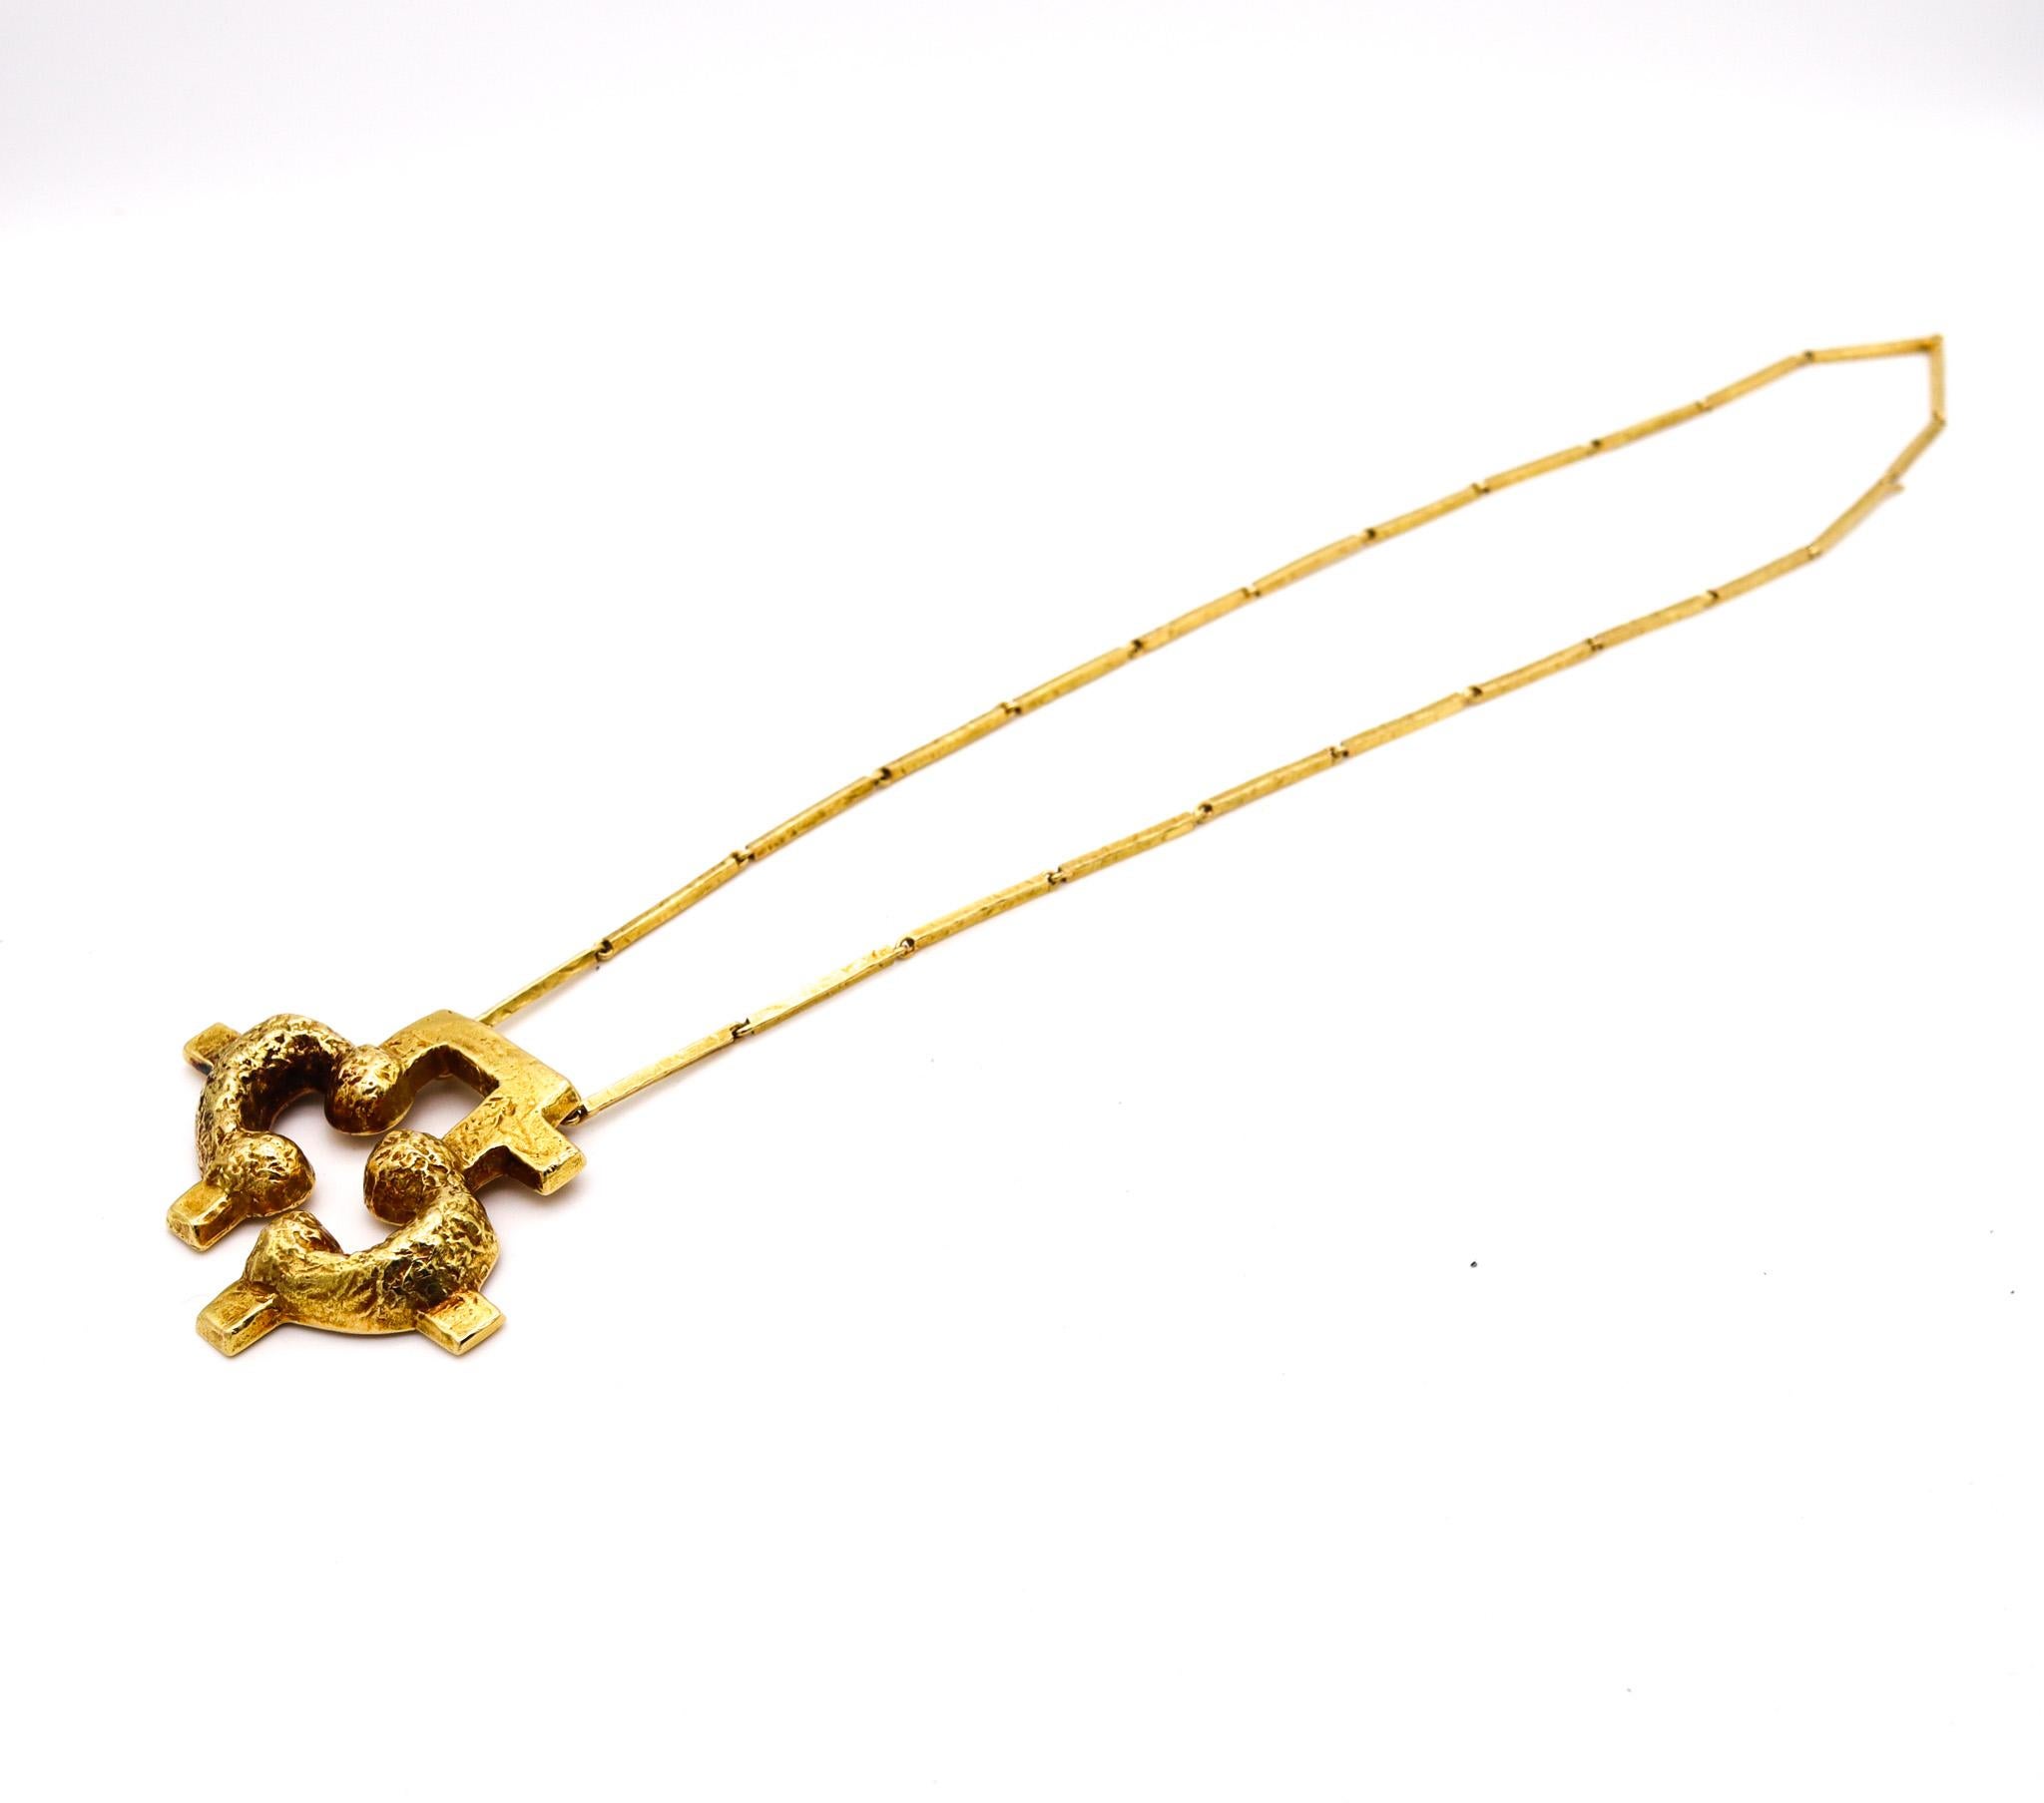 Modernist Liuba Wolf 1970 Concretism Sculptural Pendant Necklace Chain In 18Kt Yellow Gold For Sale